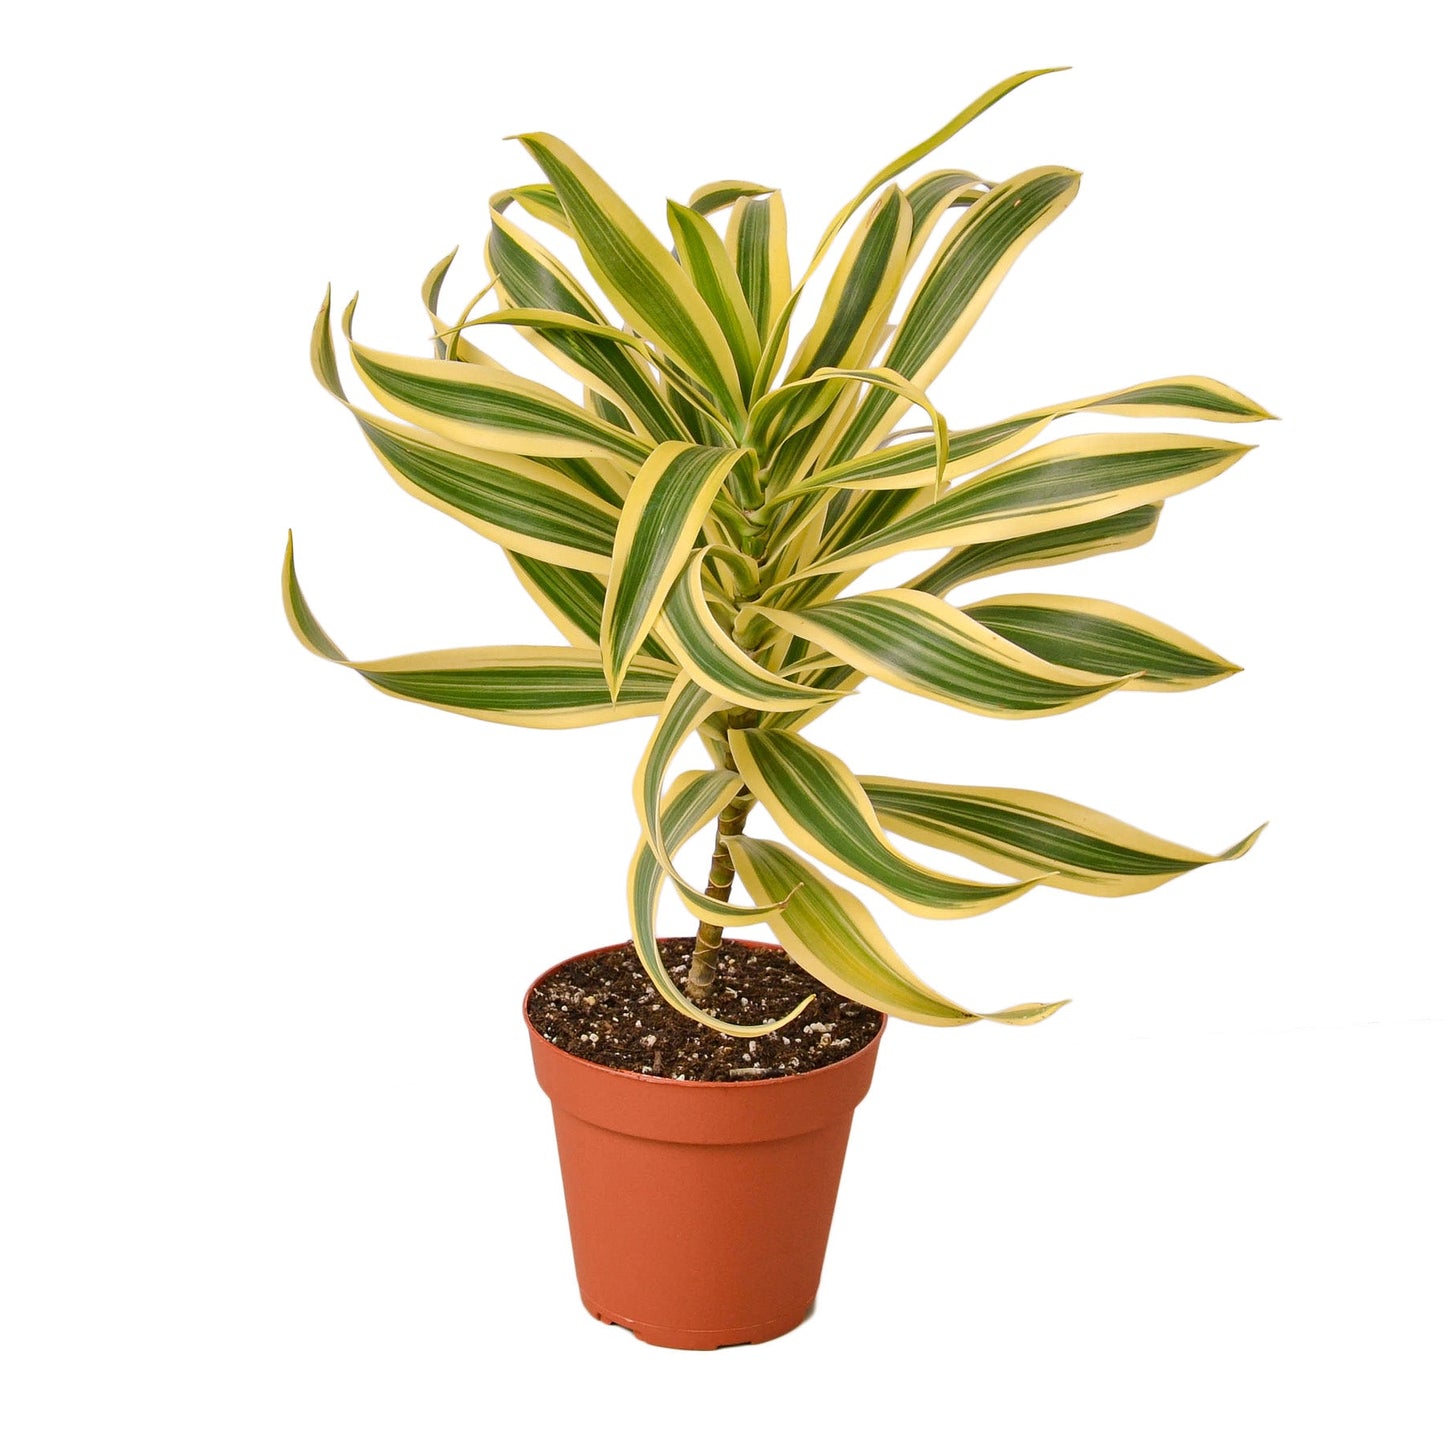 Dracaena 'Song of India'- 🌱 Beginner Friendly, Low Maintenance Tropical Tree Plant For Office or Low Light Rooms